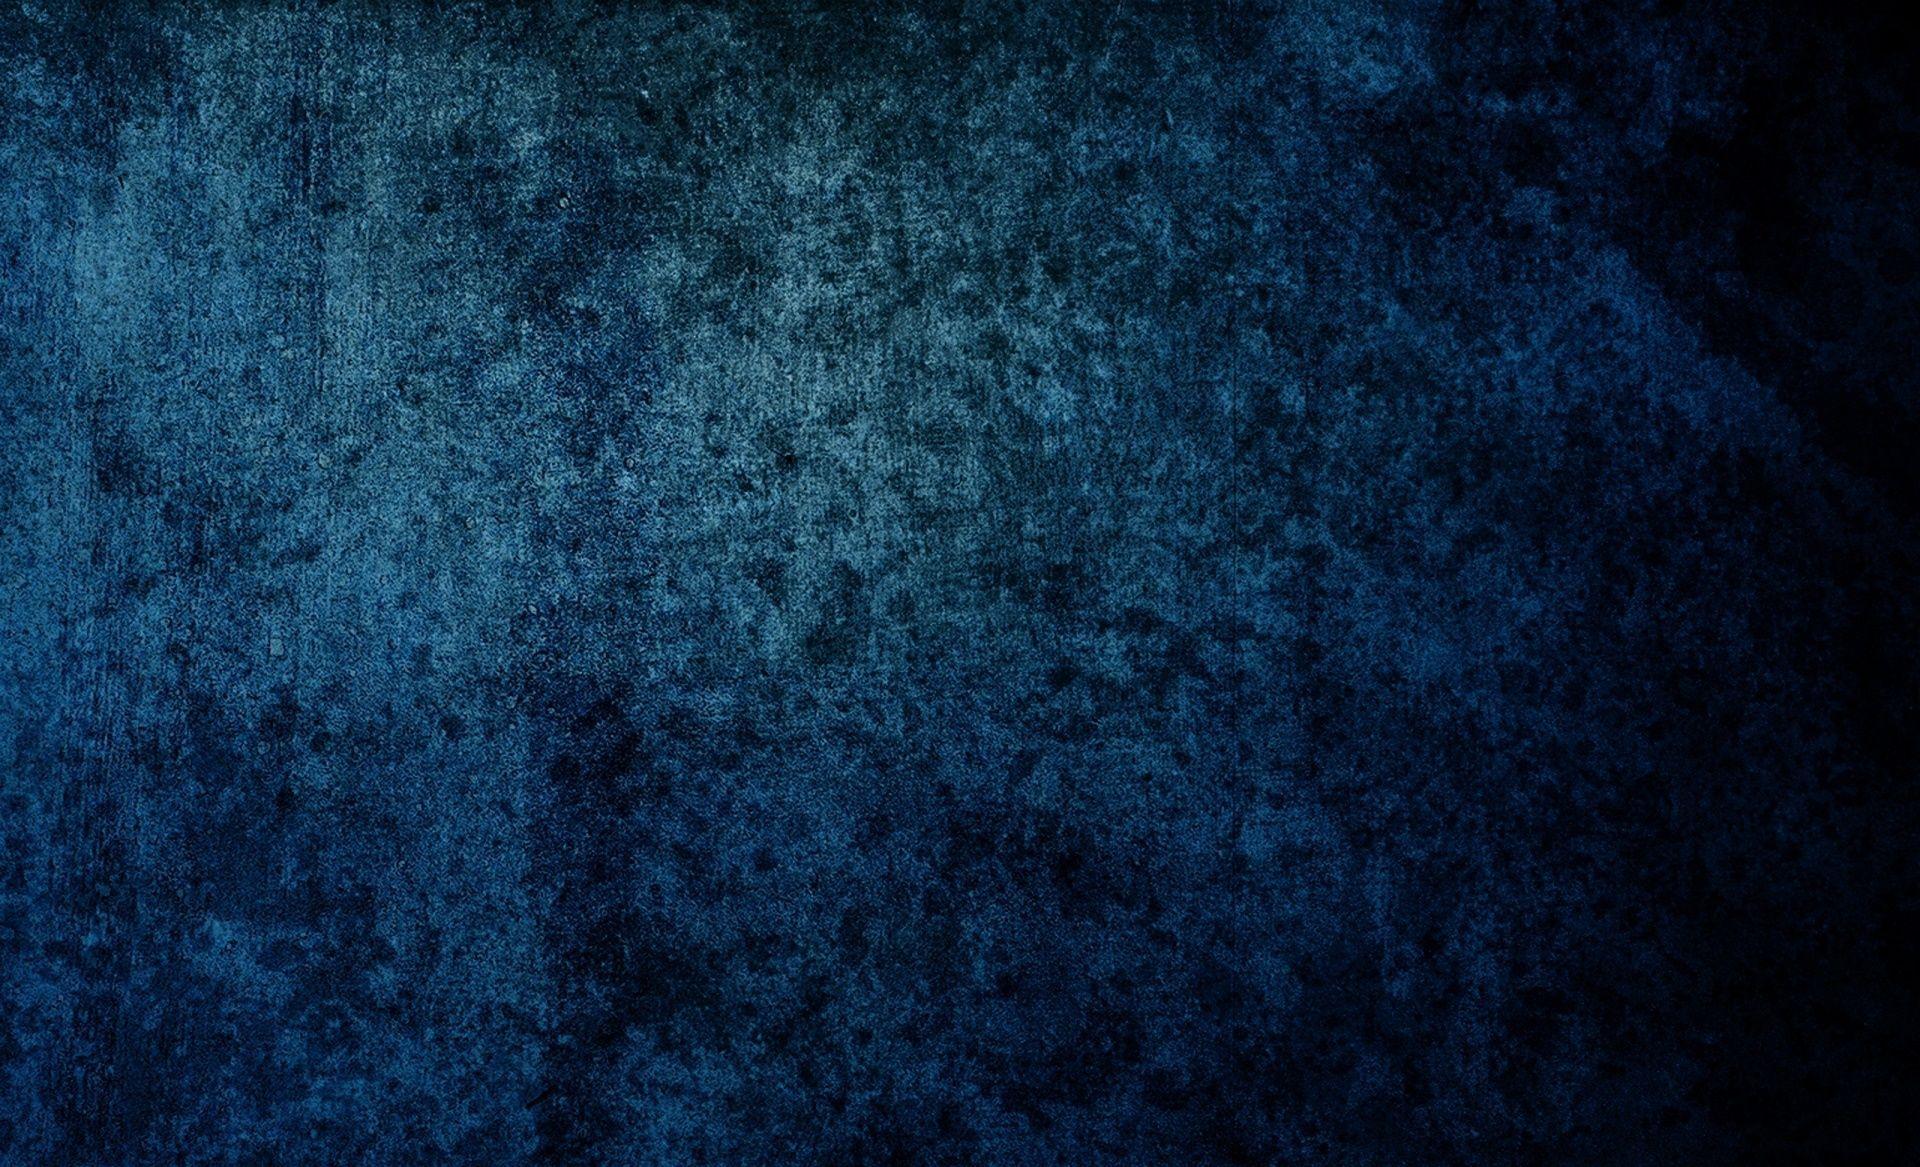 Blue Grunge Wallpapers - Top Free Blue Grunge Backgrounds ...